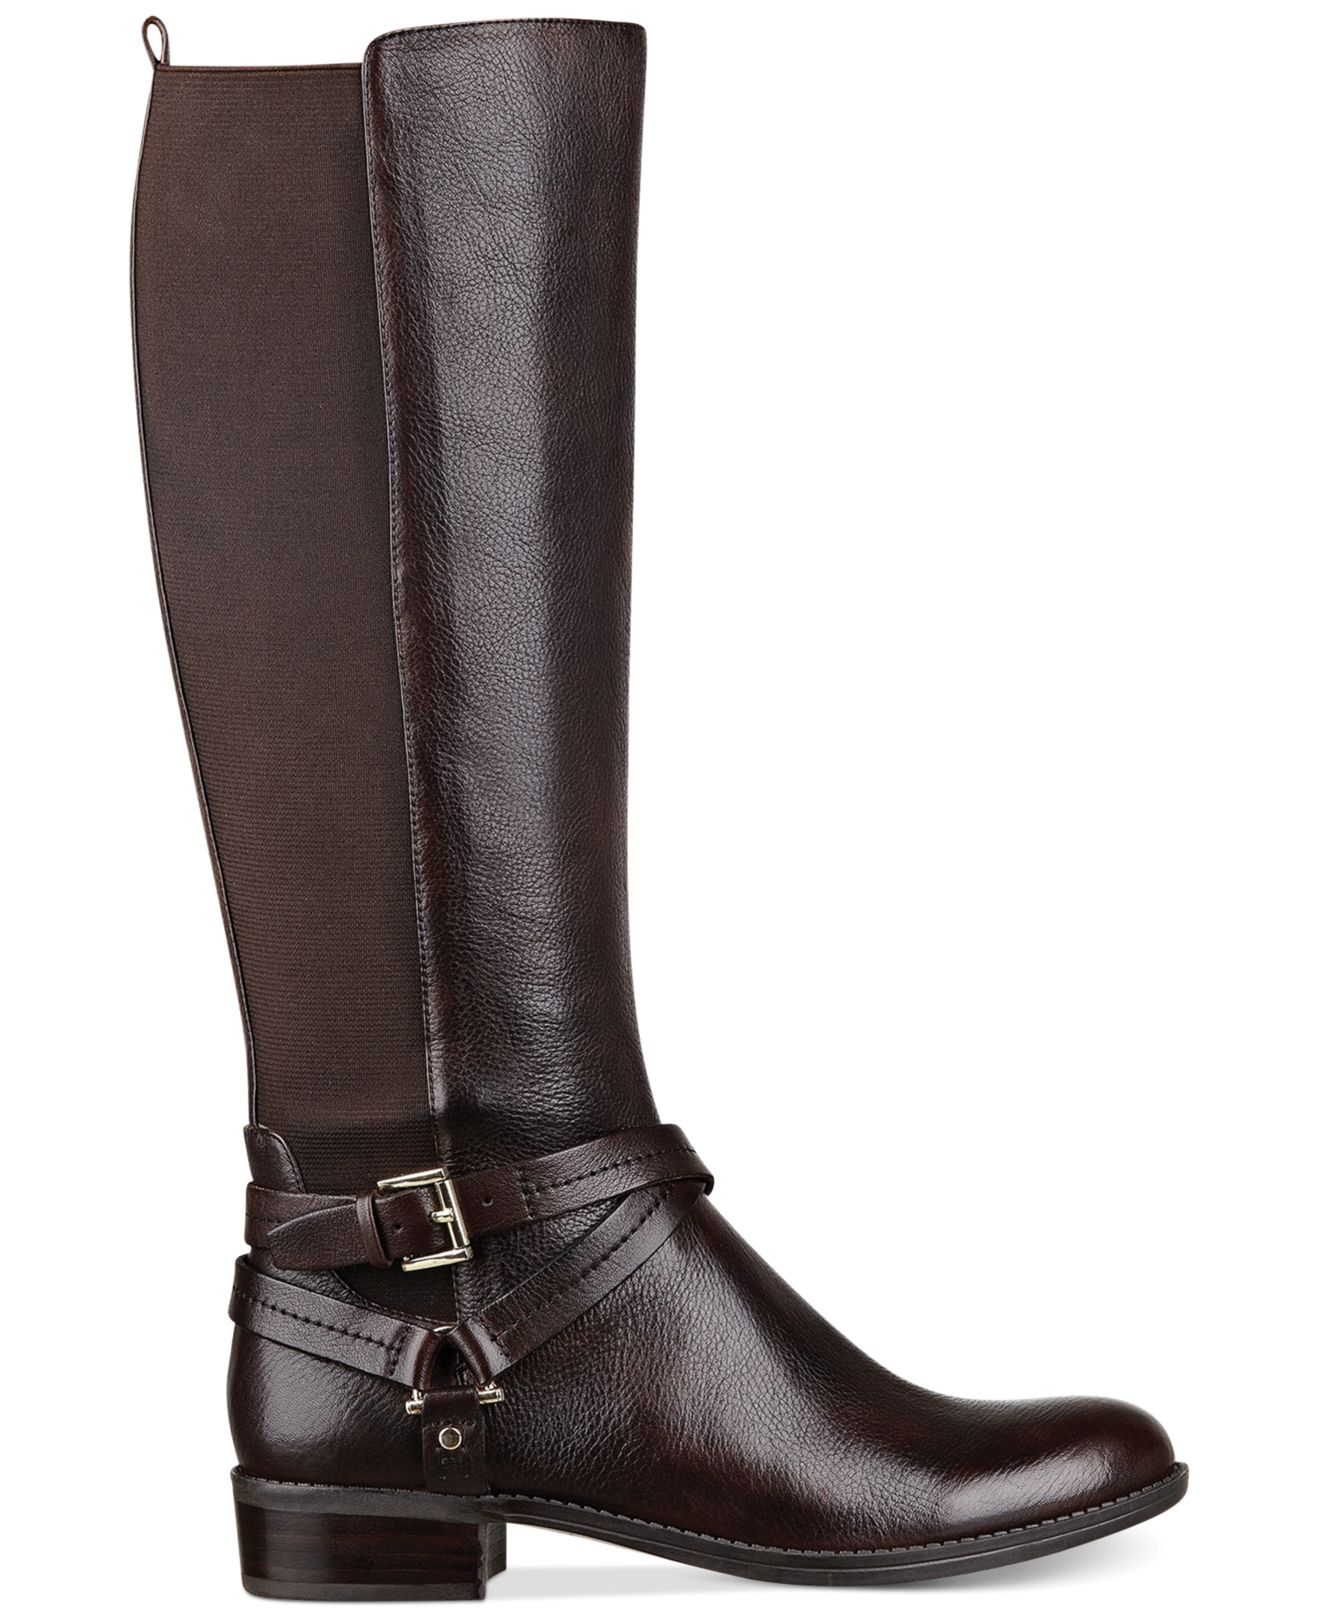 stretch back riding boots